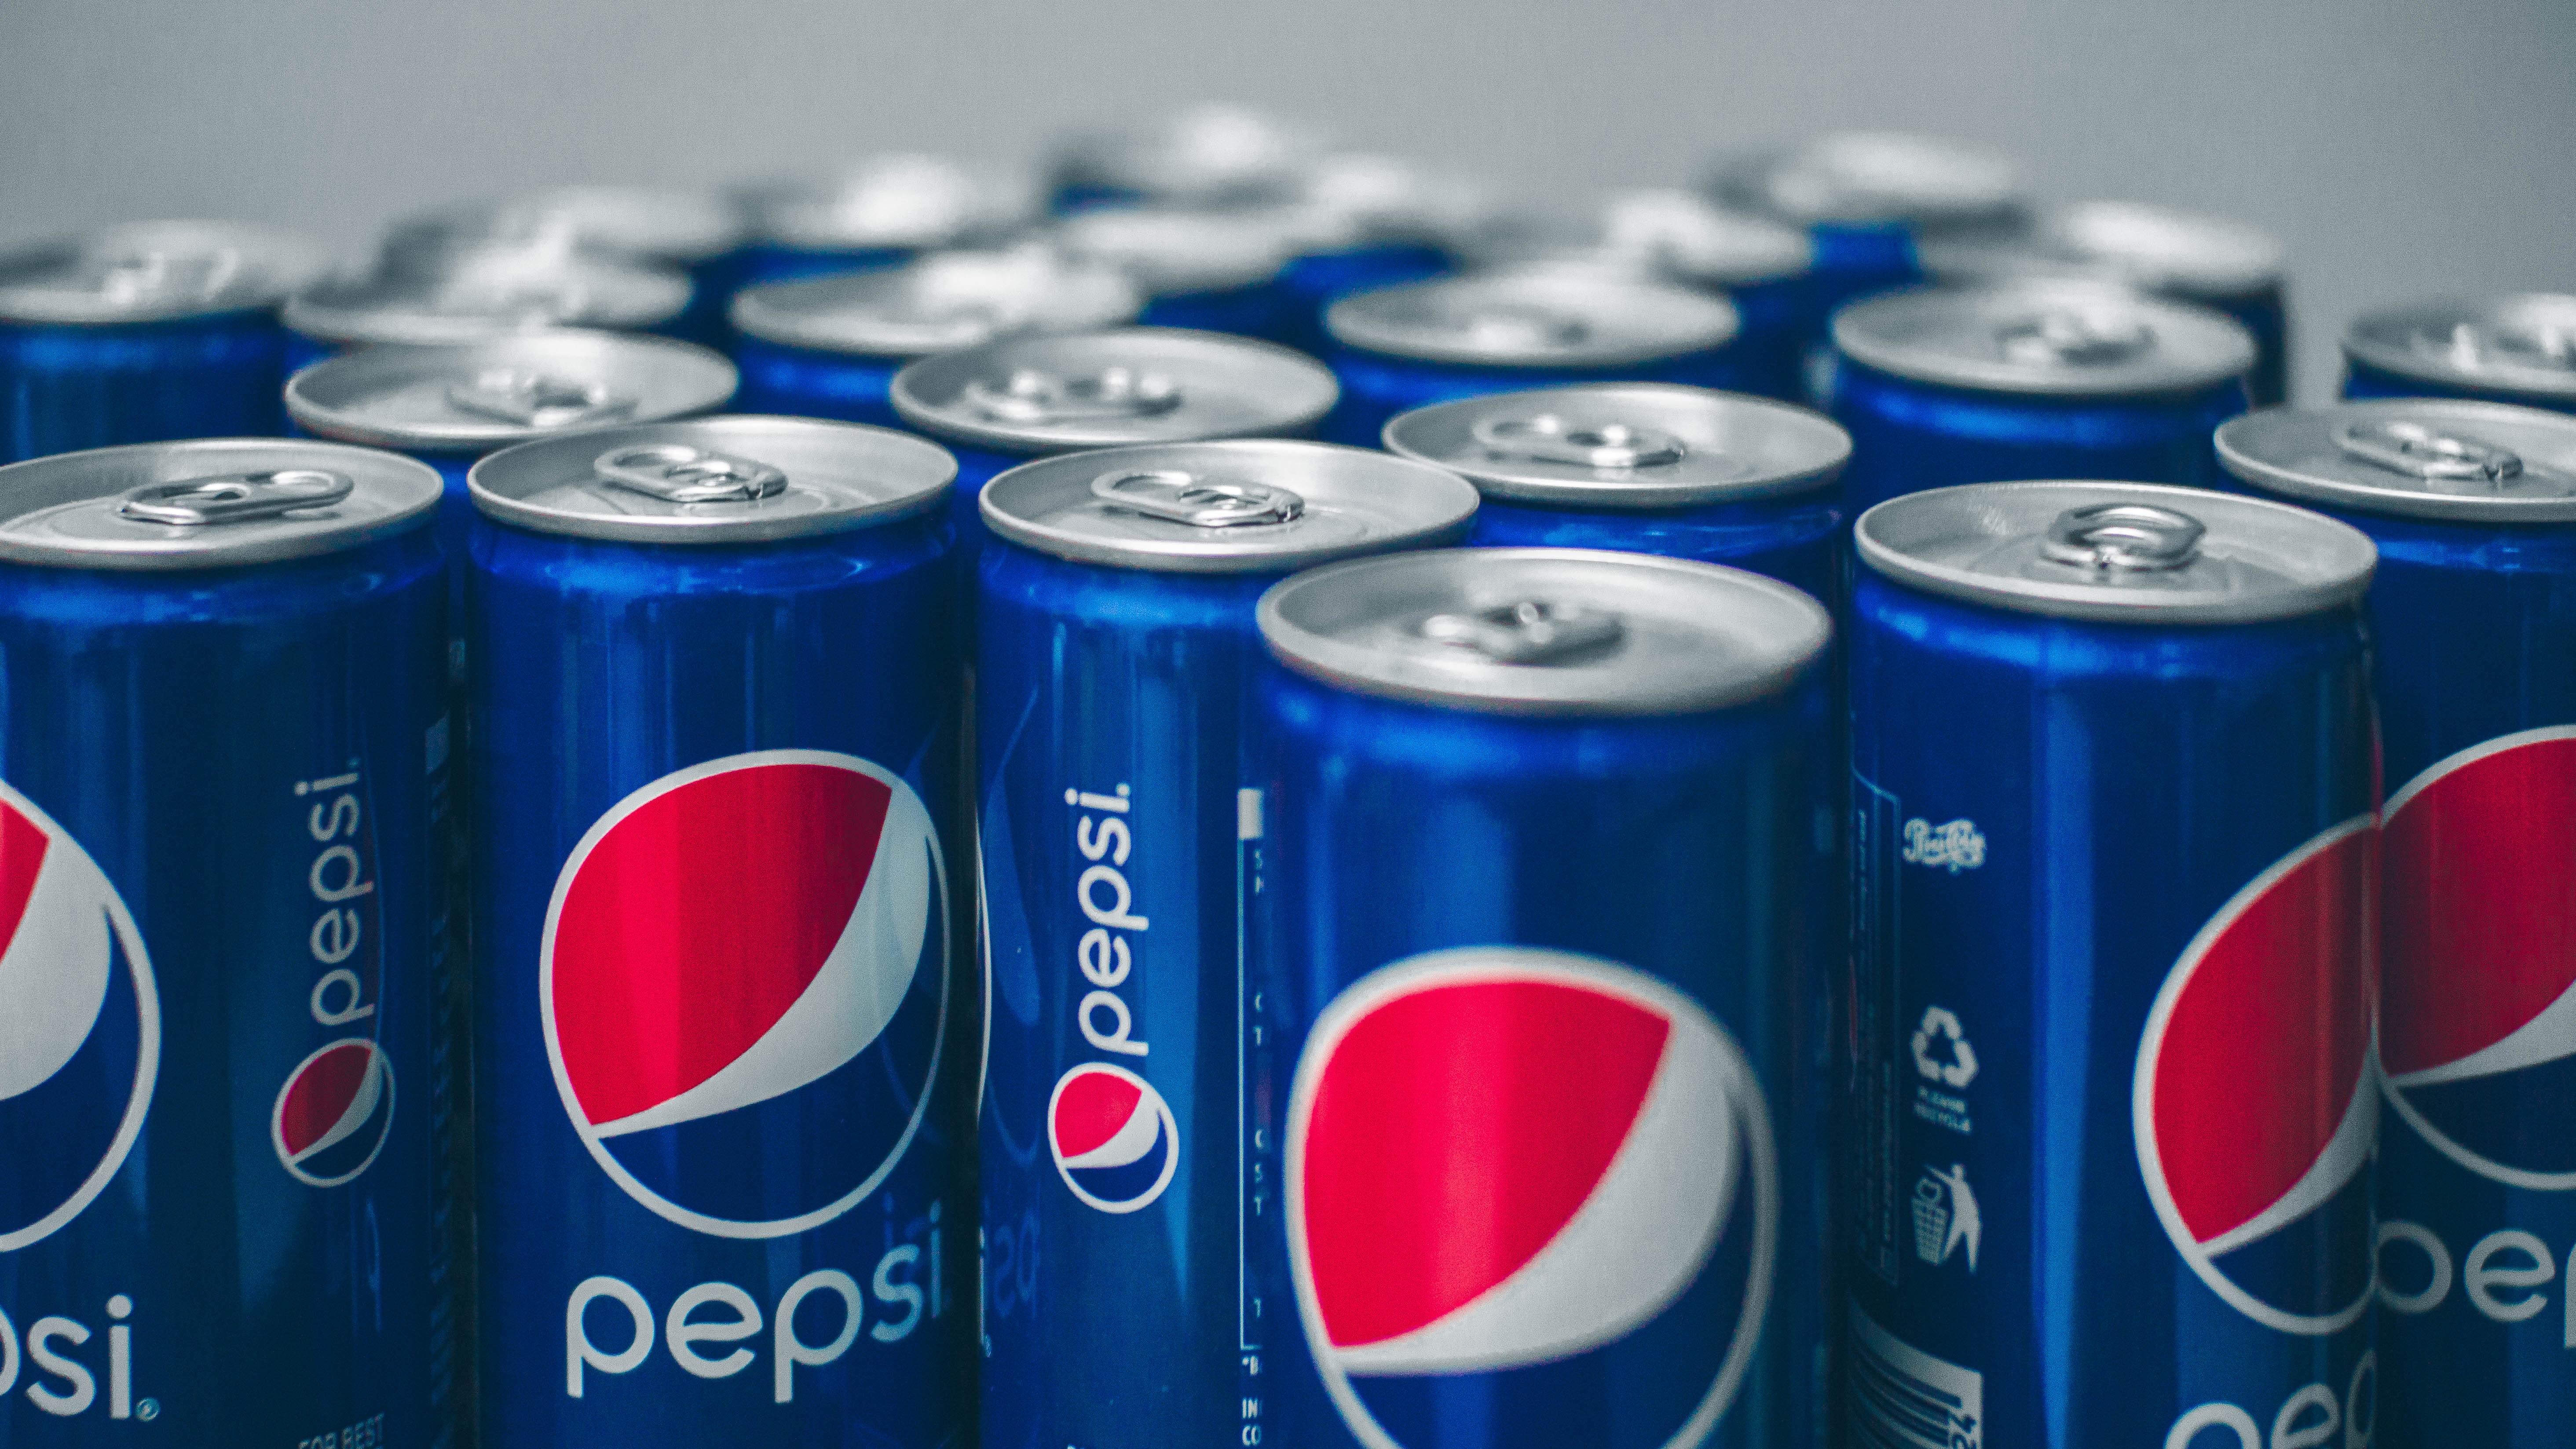 PepsiCo, looking ahead with its pep+ programme, gets ready